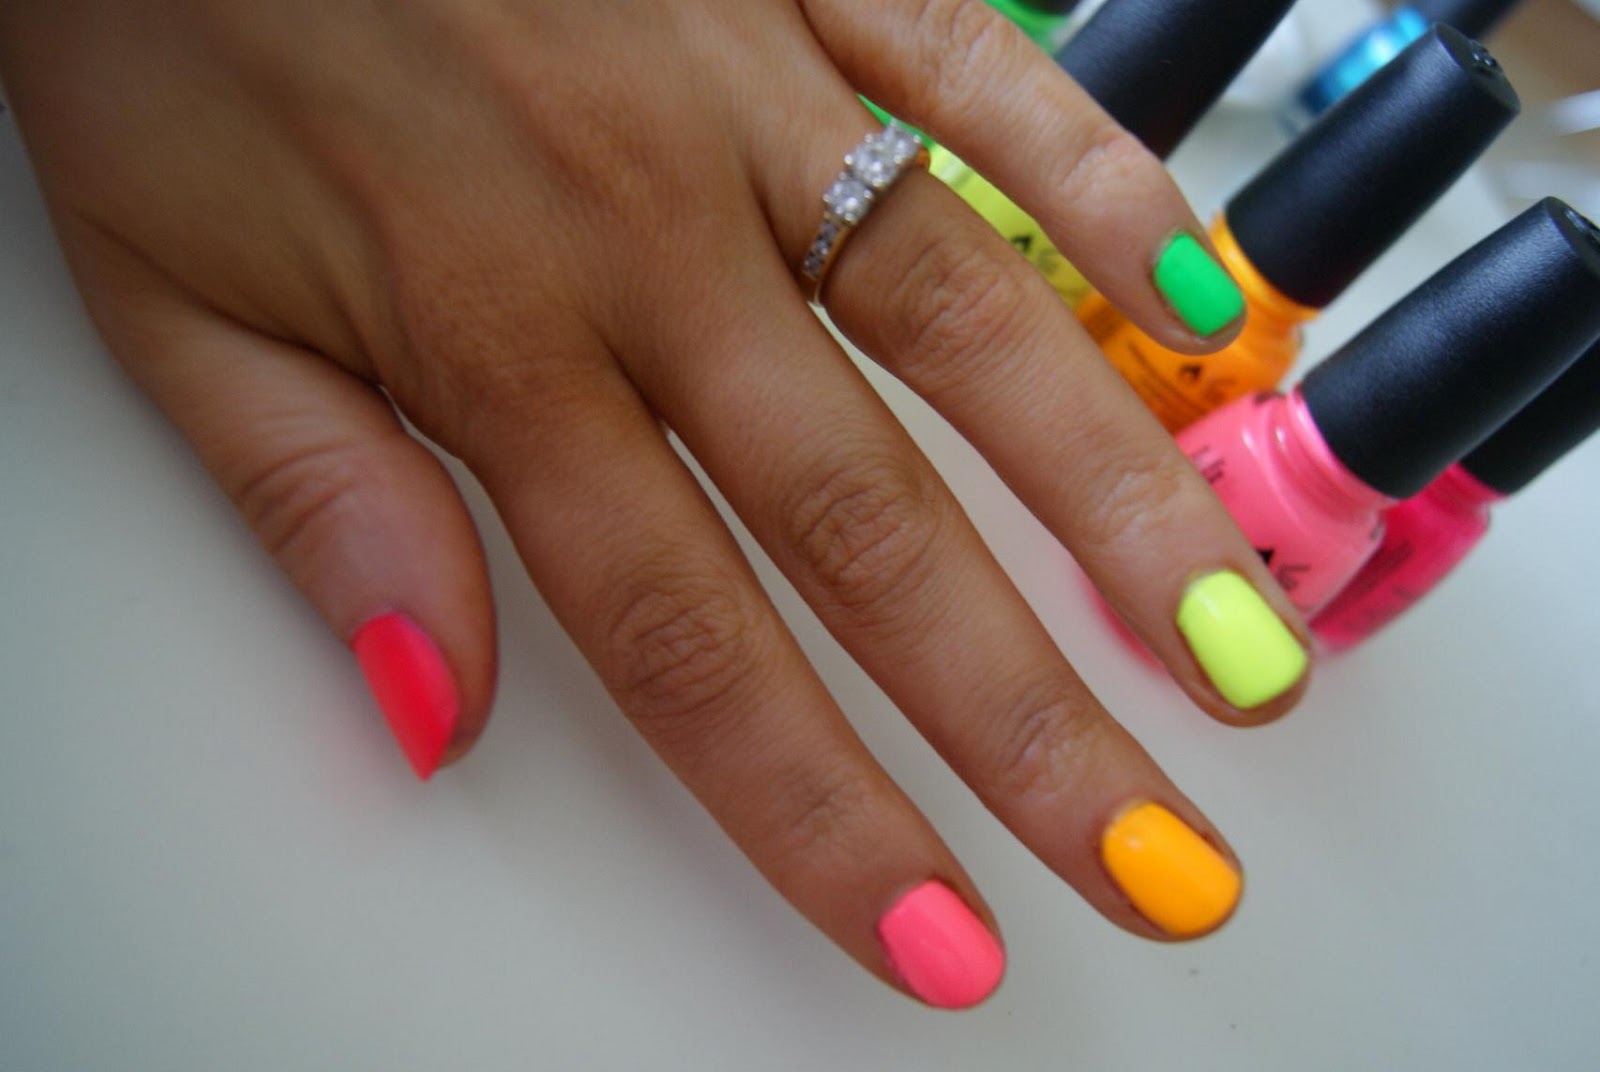 5. Neon Summer Nail Trends - wide 3